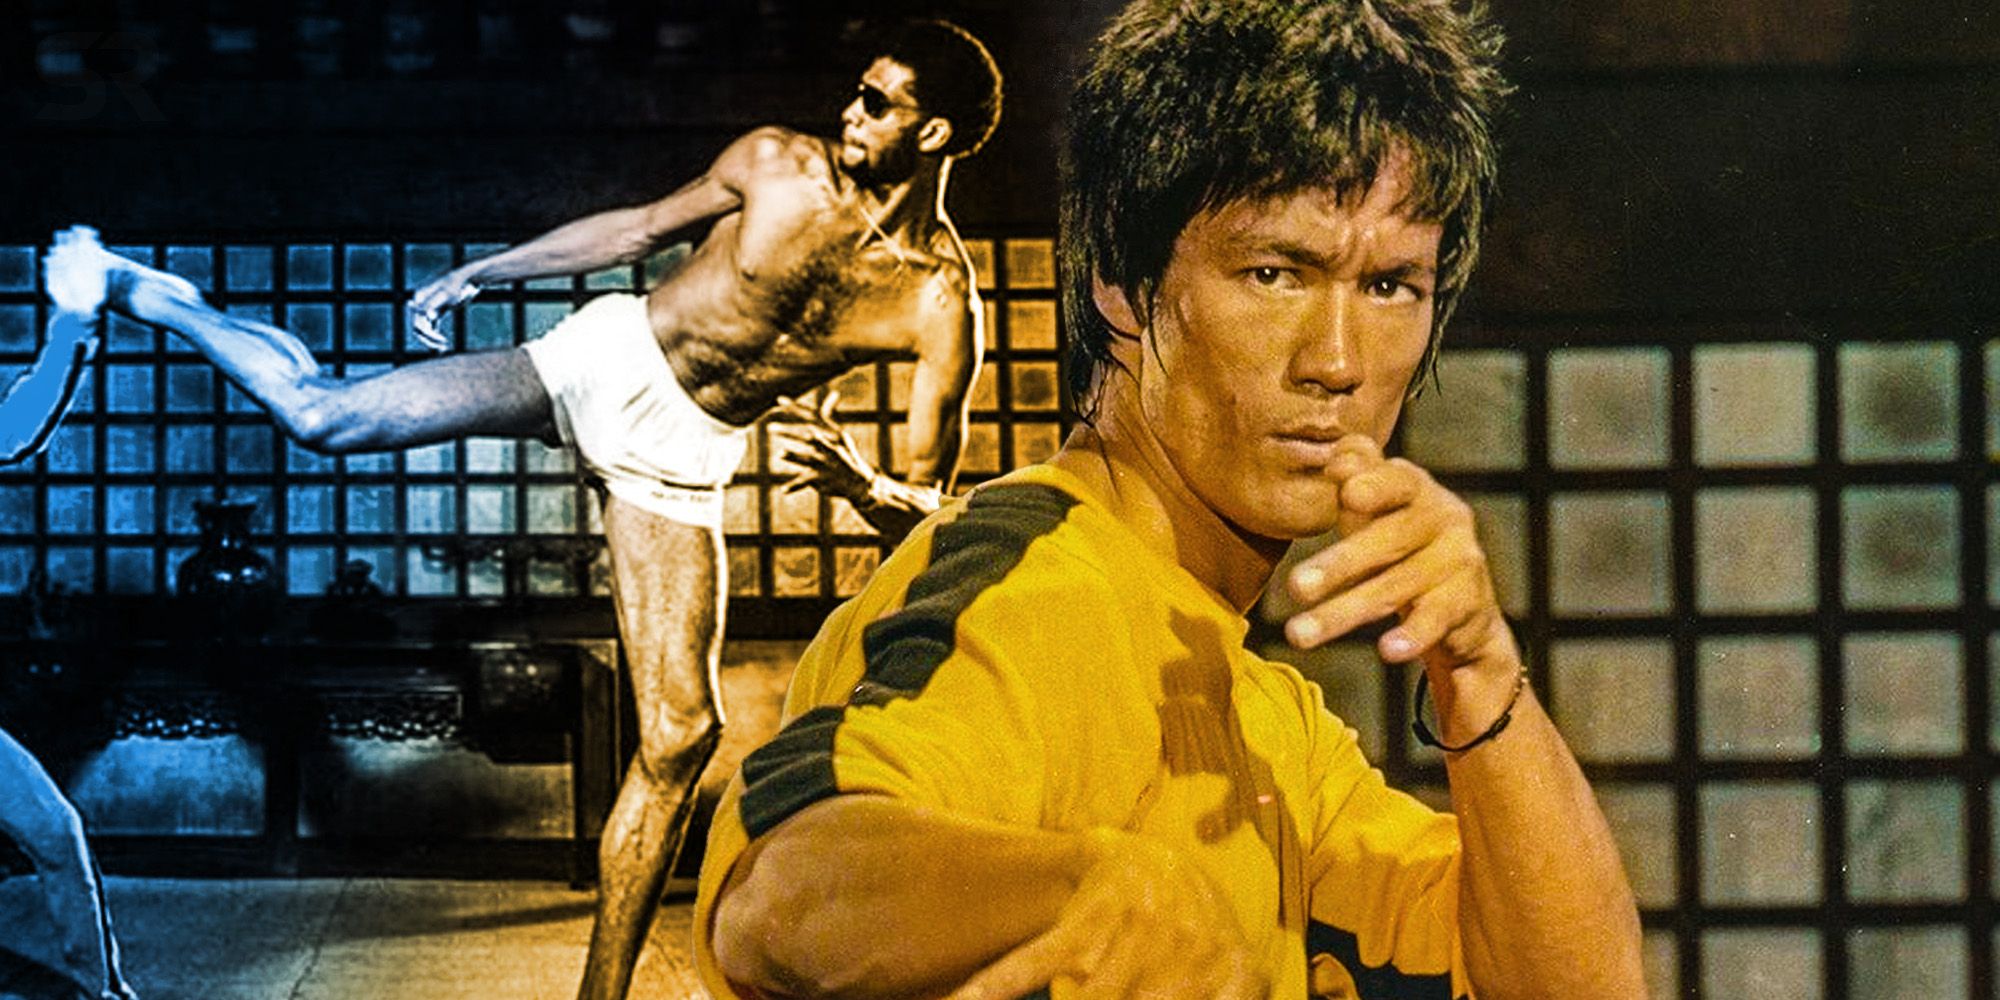 Bruce Lee's Game Of Death: Why Kareem Abdul-Jabbar Really Cameoed